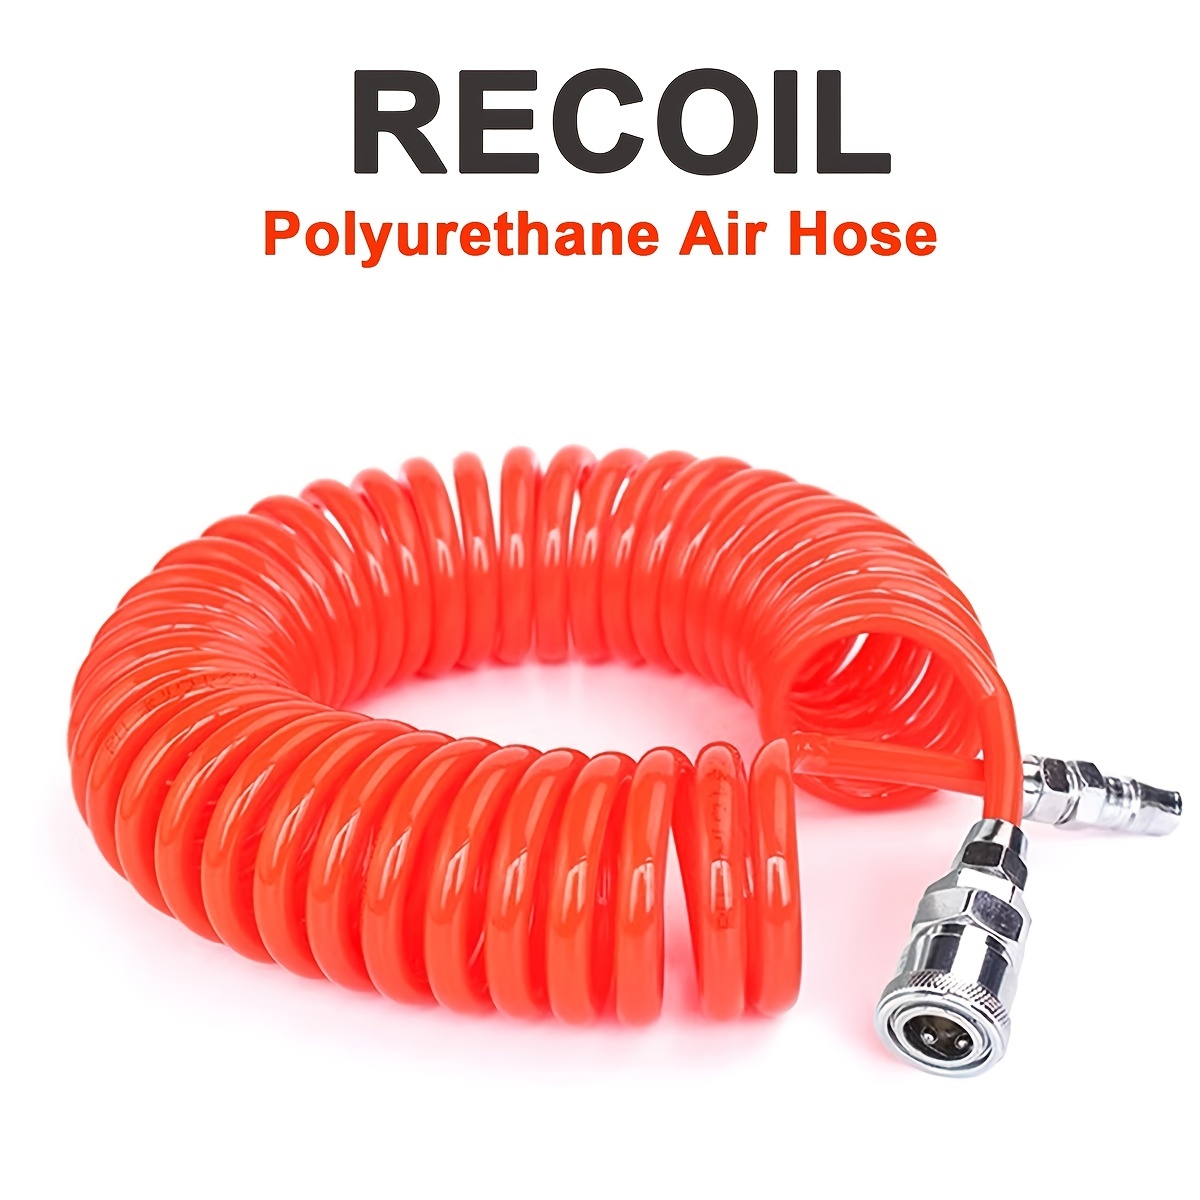 Polyurethane Recoil Air Hose With Bend Restrictors - Temu